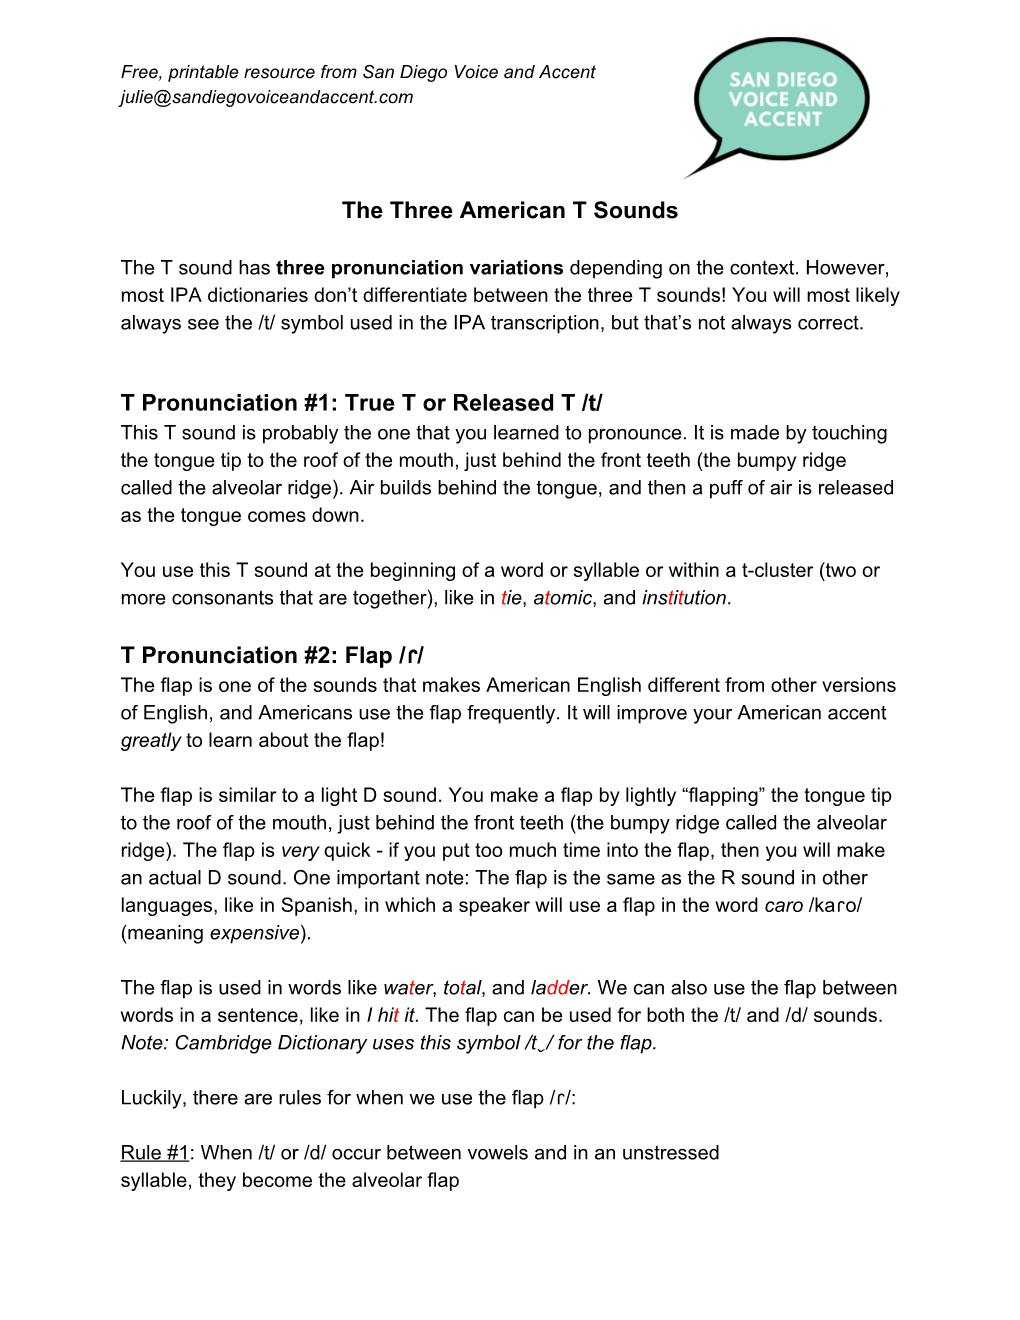 The Three American T Sounds T Pronunciation #1: True T Or